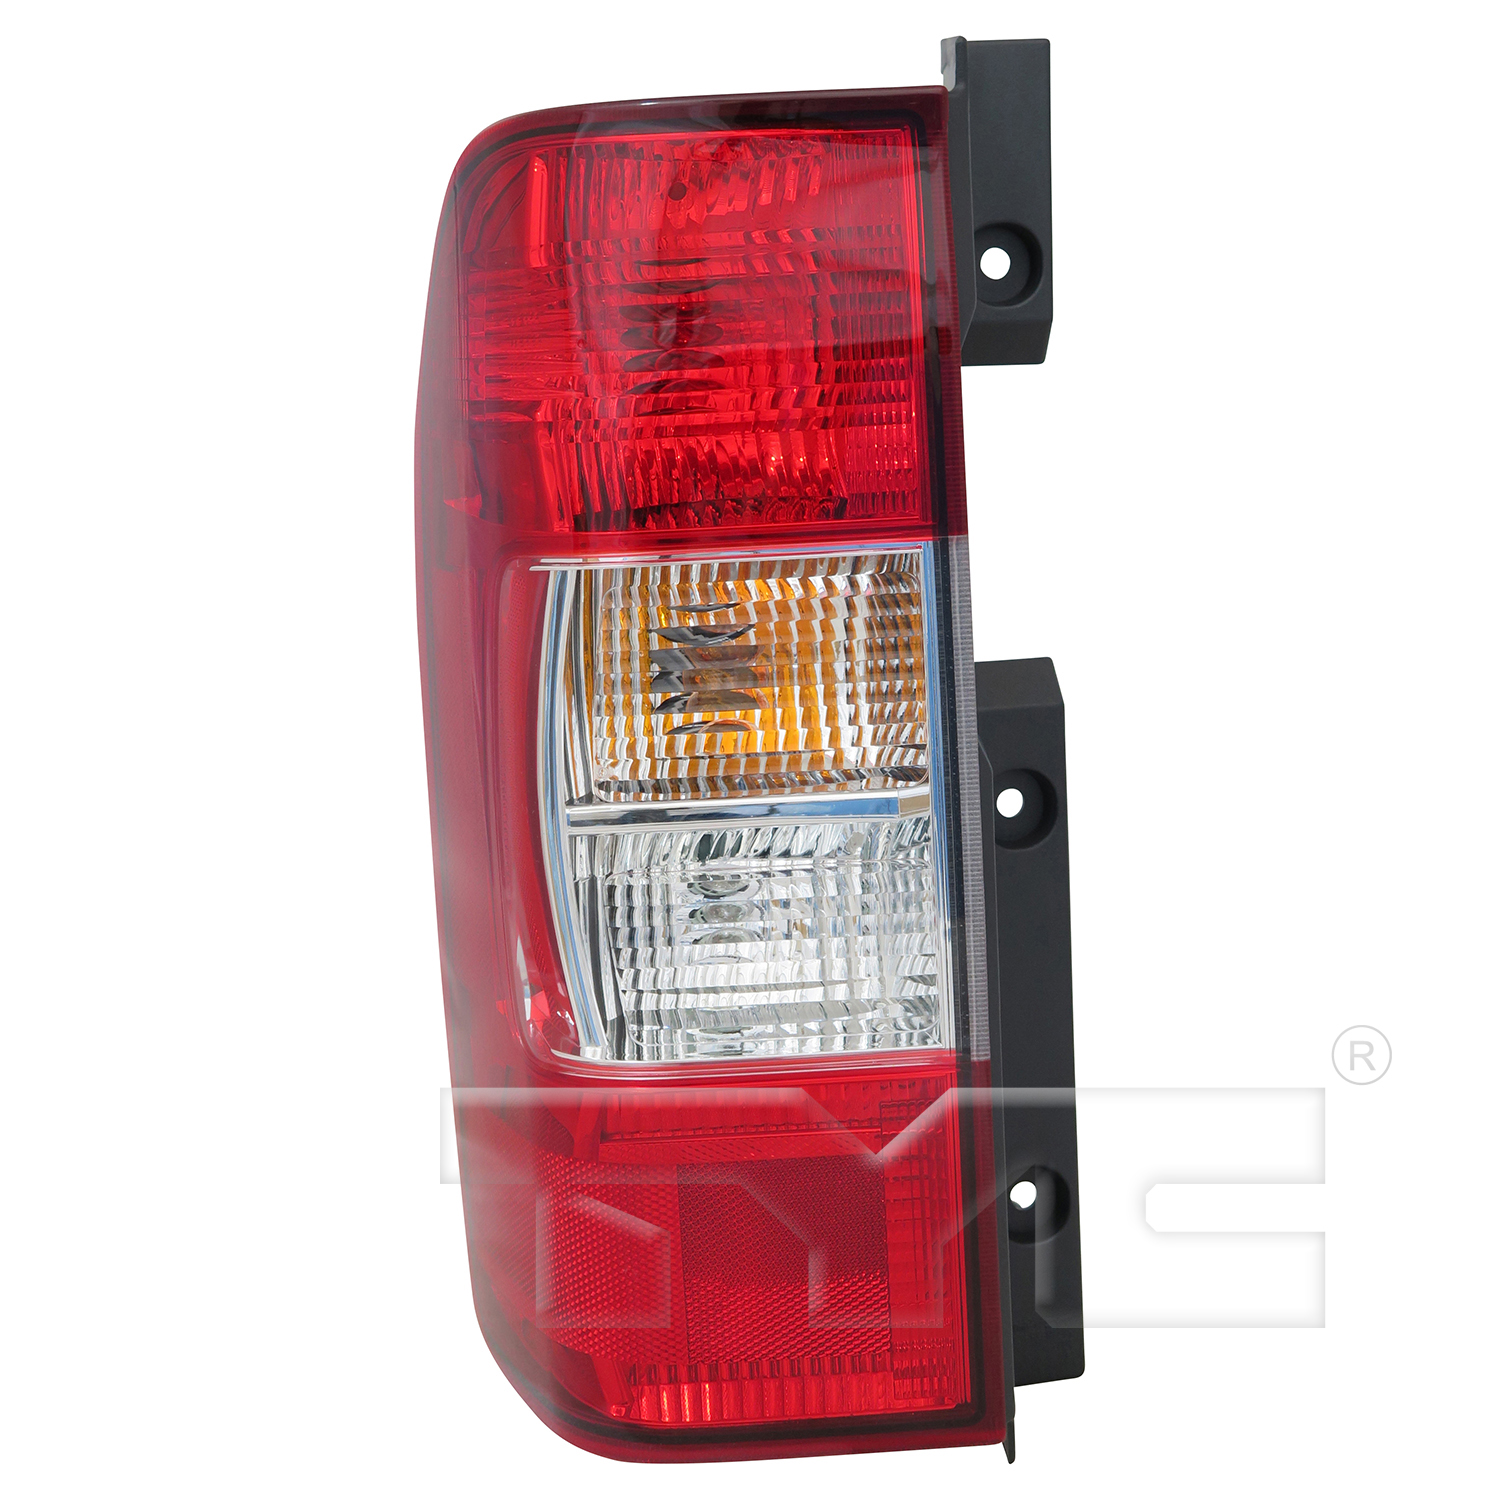 Aftermarket TAILLIGHTS for NISSAN - NV1500, NV1500,12-21,LT Taillamp assy